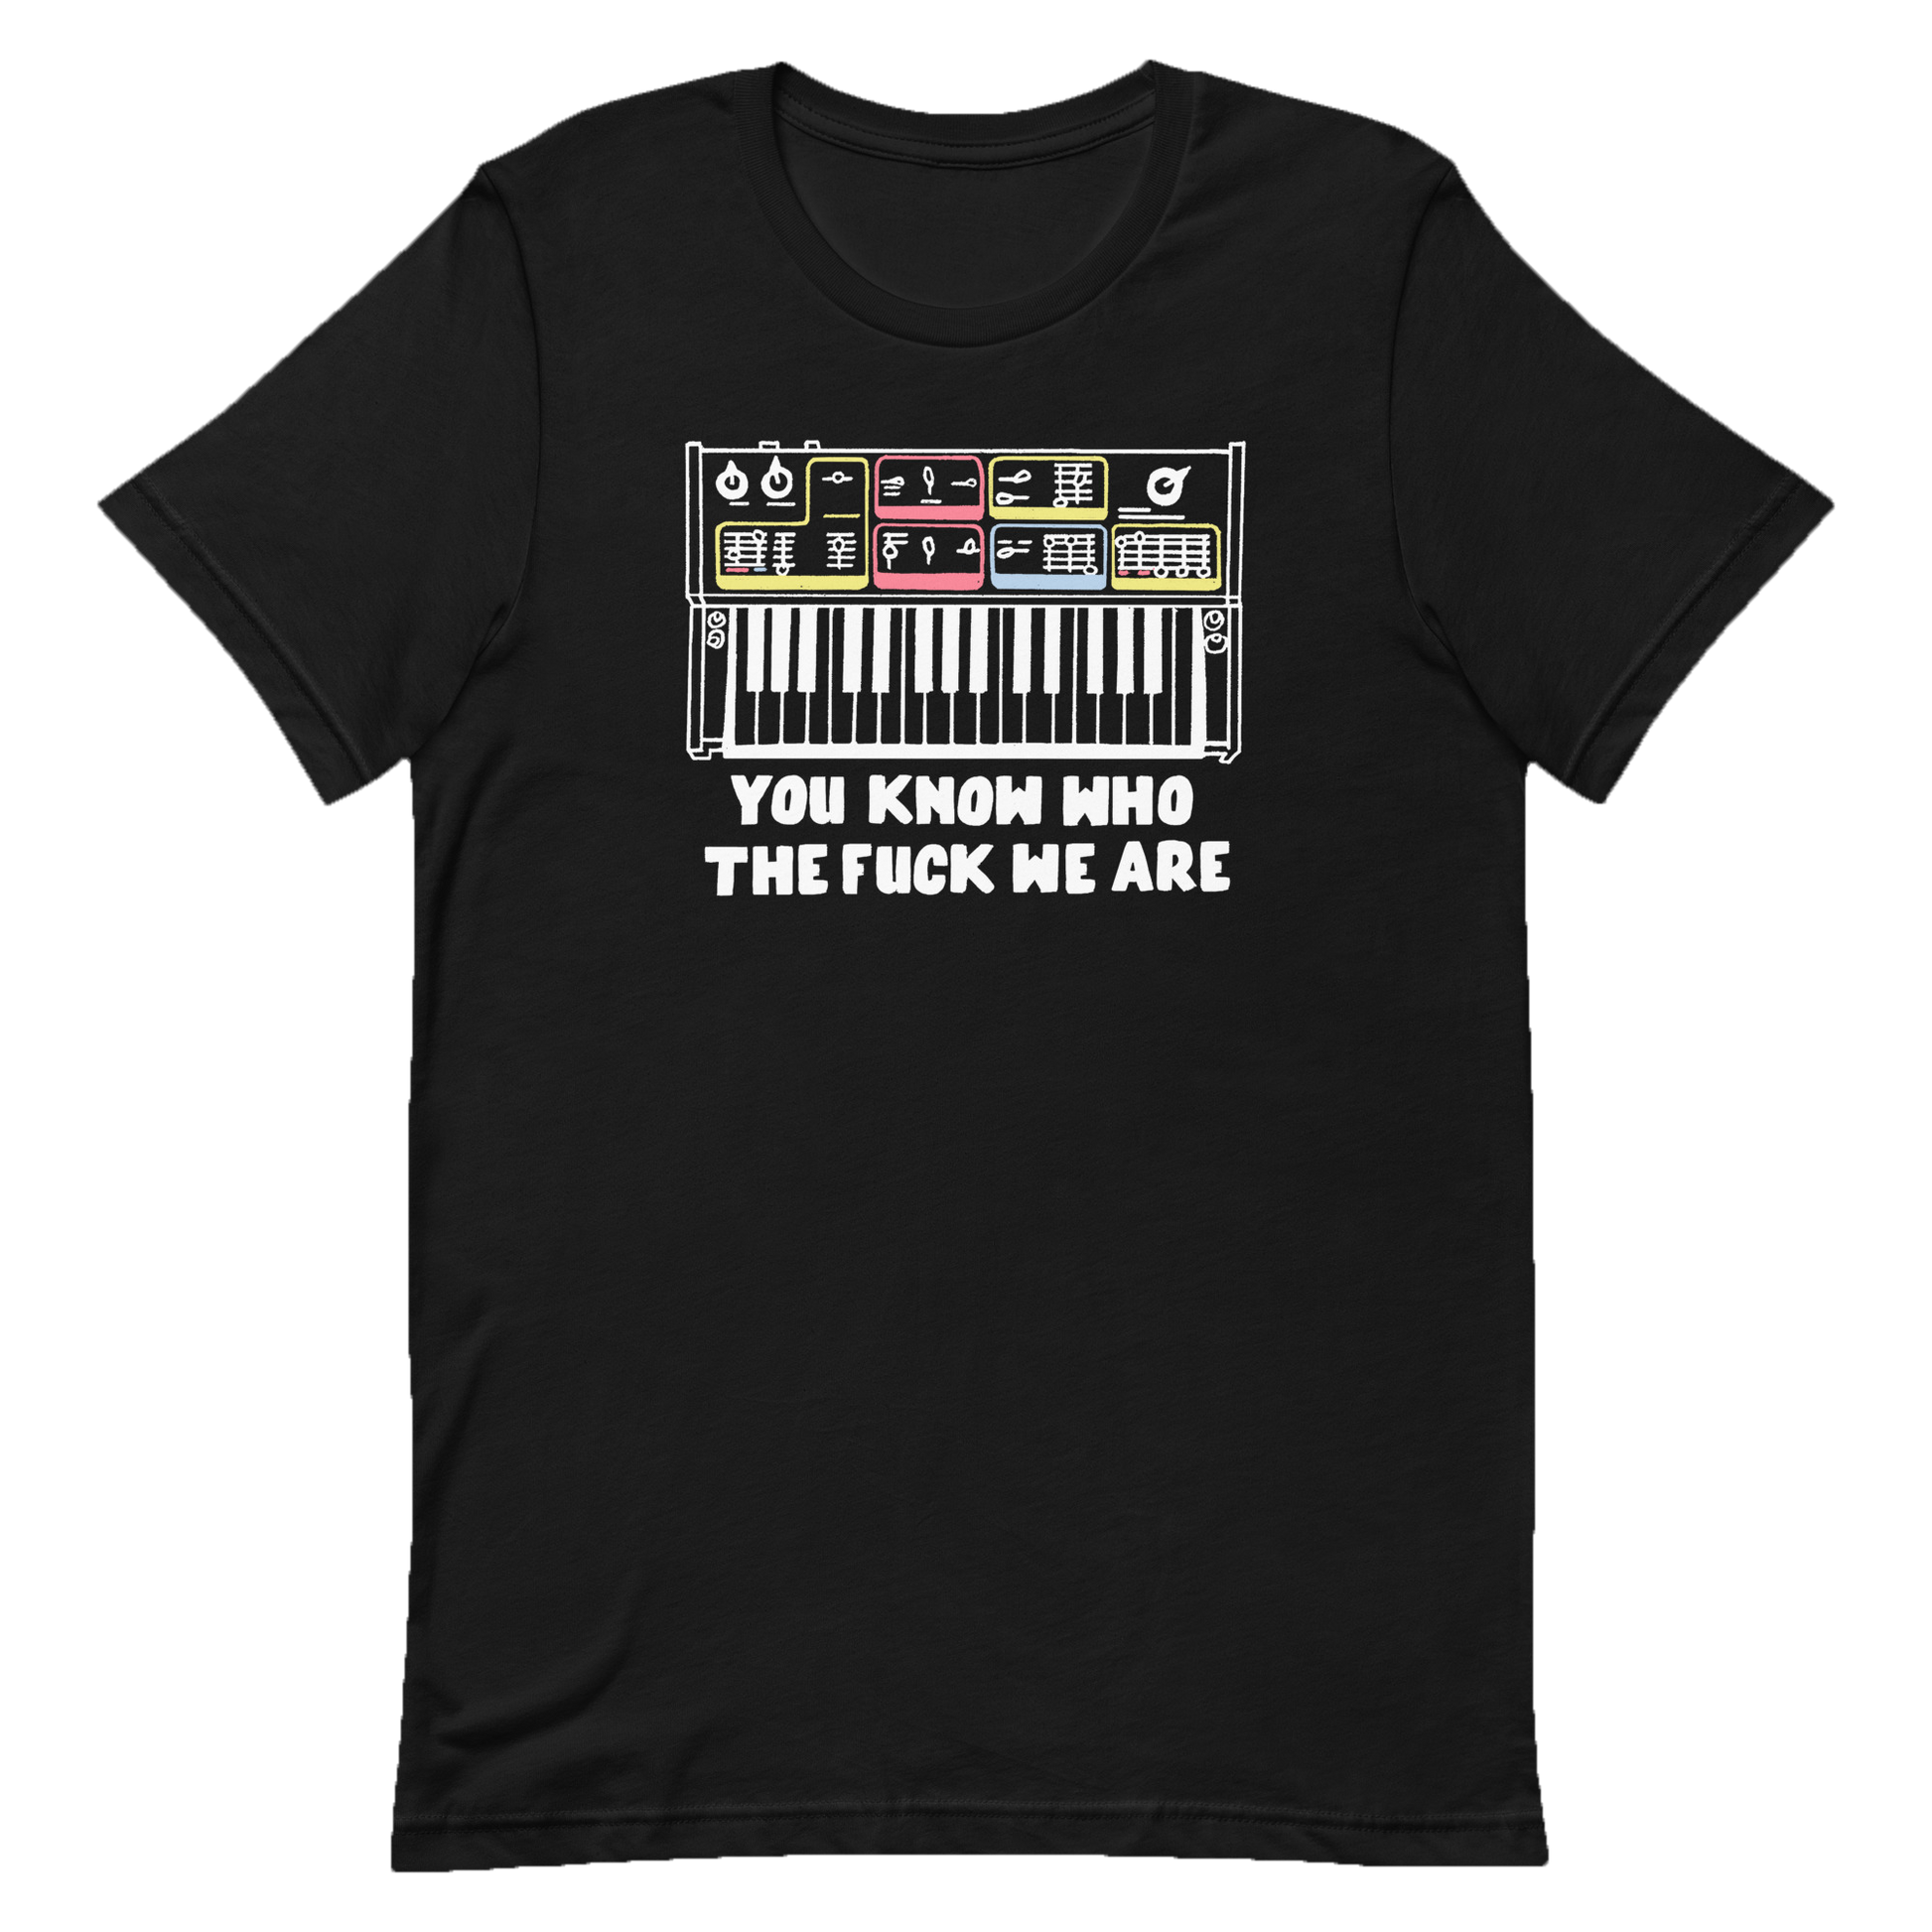 You Know Who Tee front with synth says You Know Who the Fuck We Are